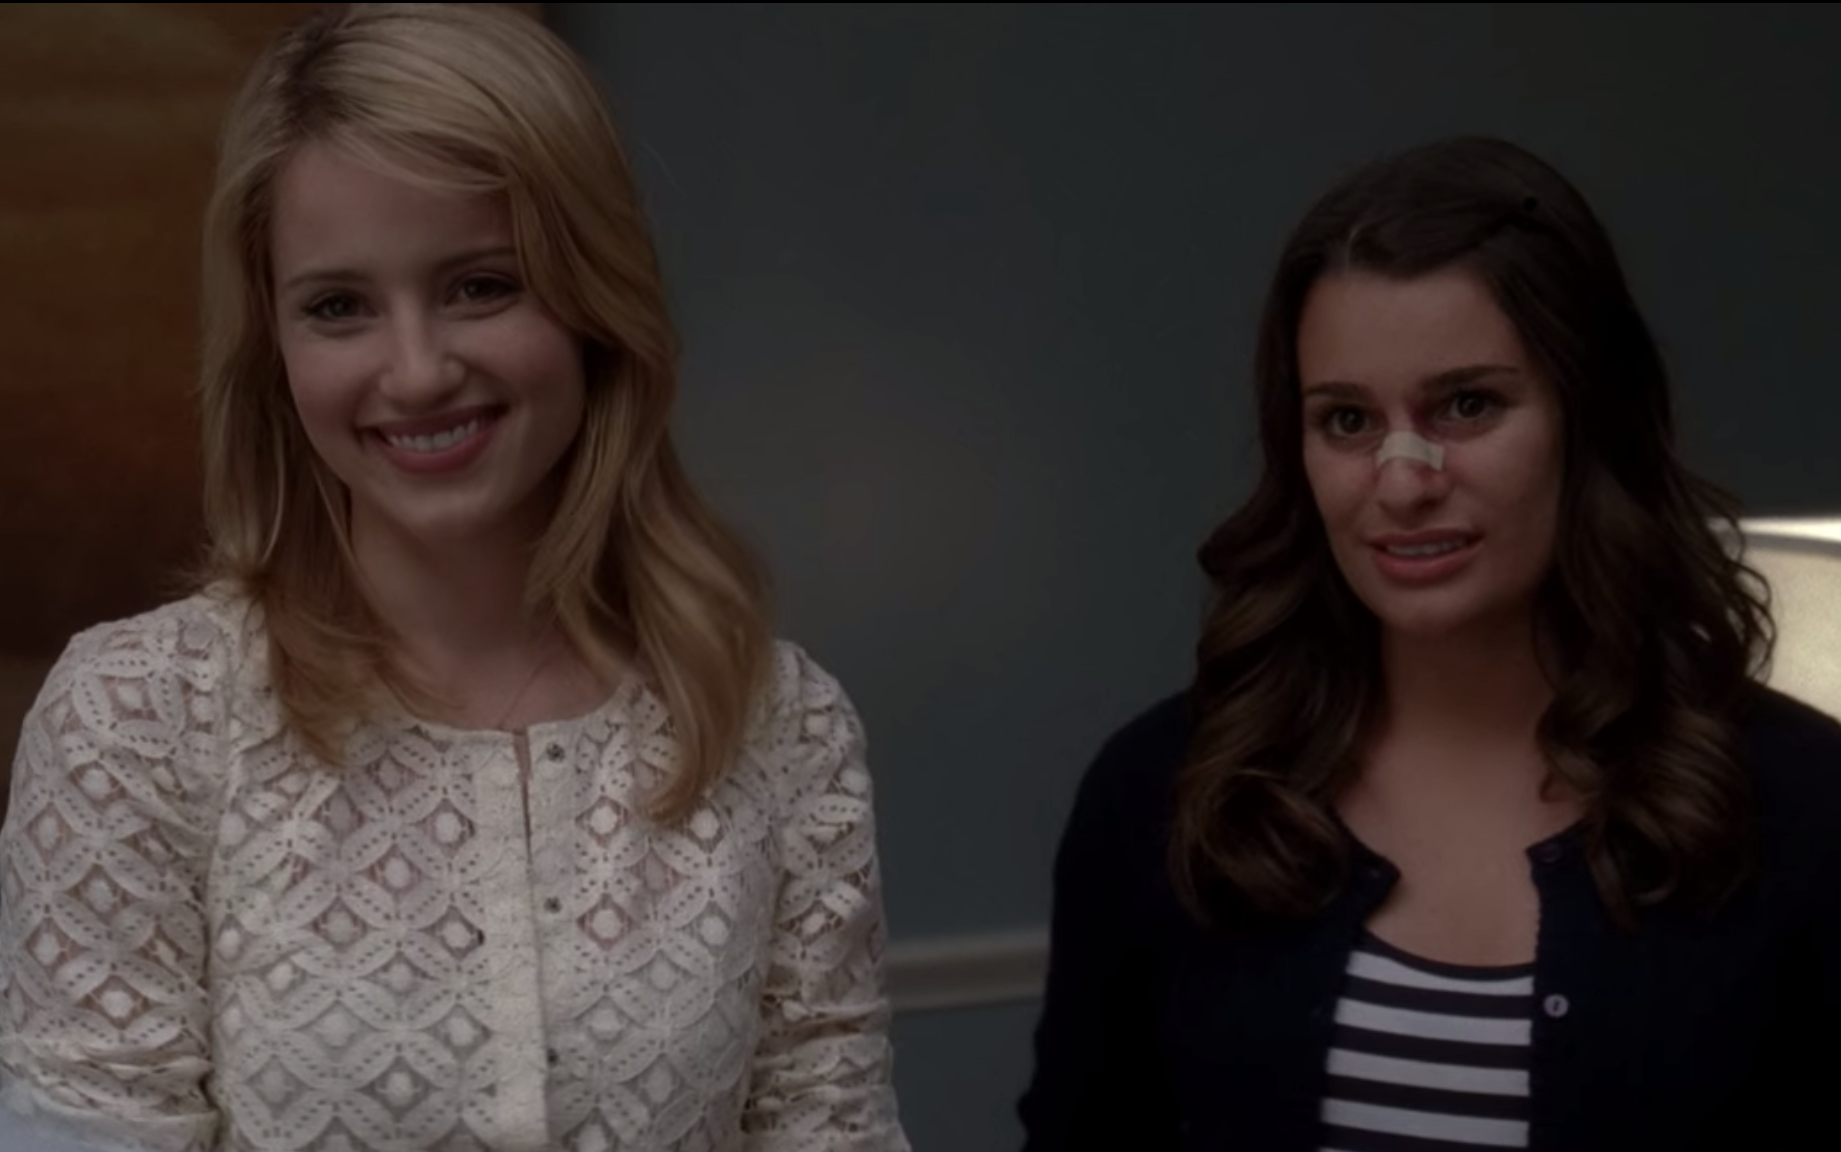 Quinn Fabray, wearing a white lace sweater, smiles brightly while Rachel Berry grimaces as her nose is broken